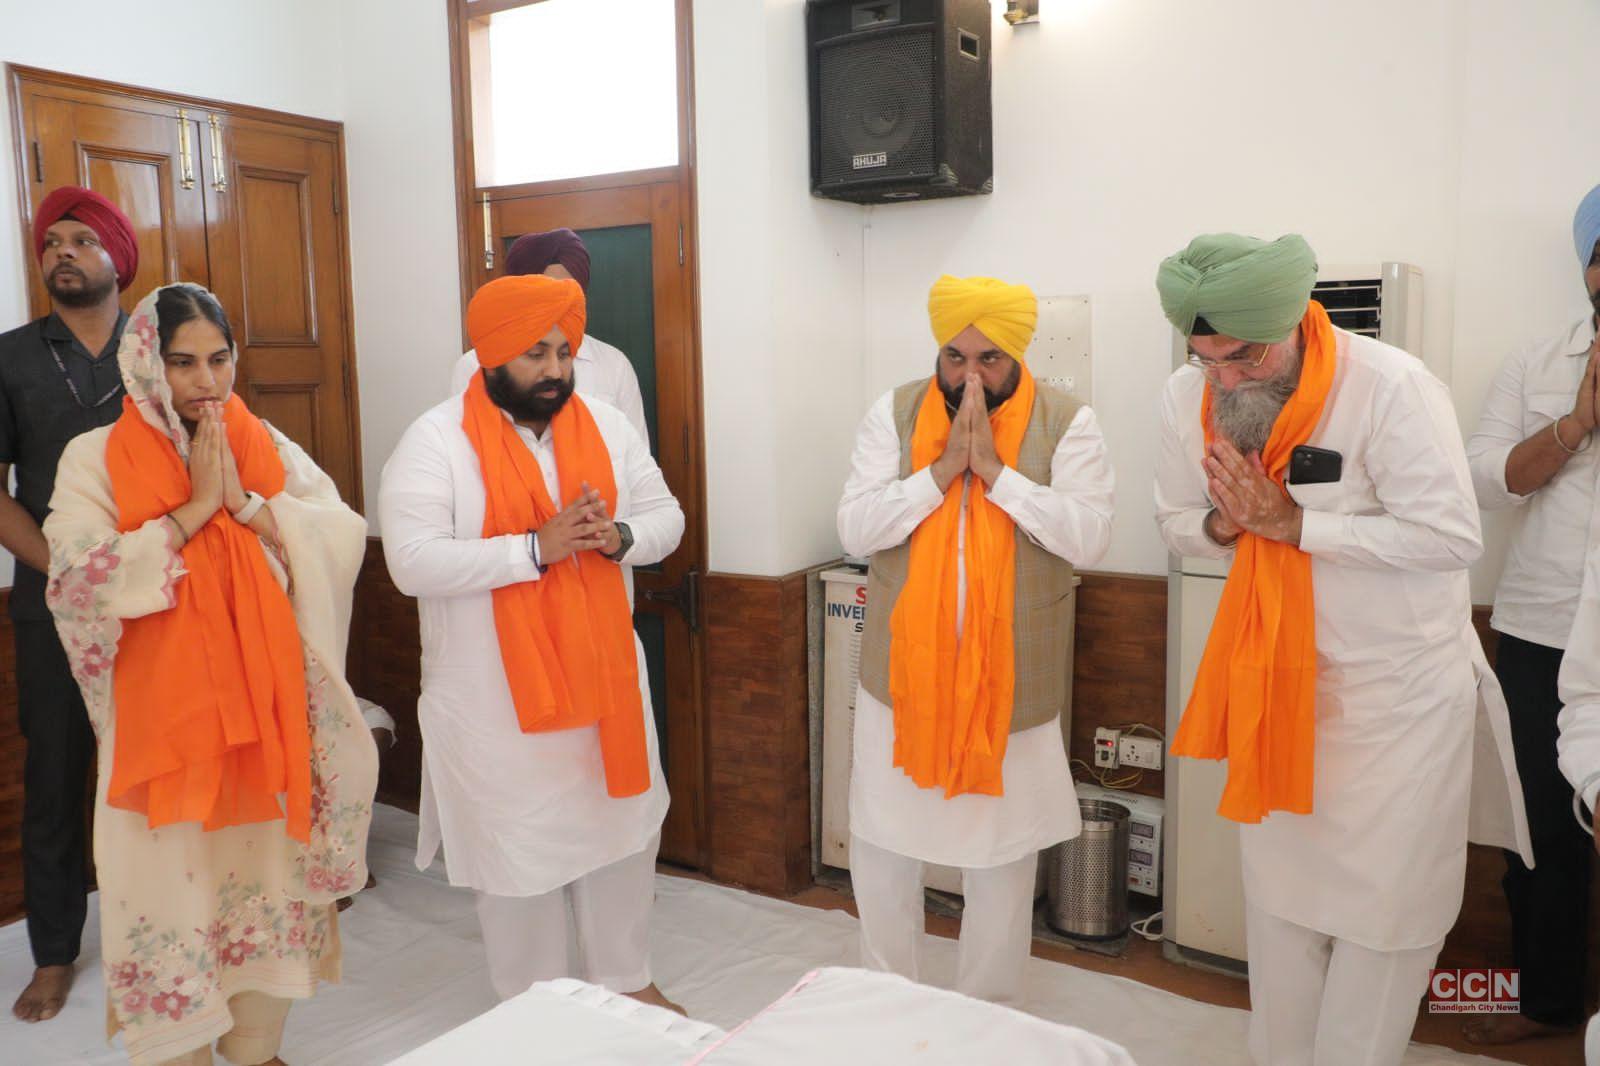 Last Respects Paid to Rakesh Yadav, Prayer attended by Bhagwant Singh Mann & other personalities